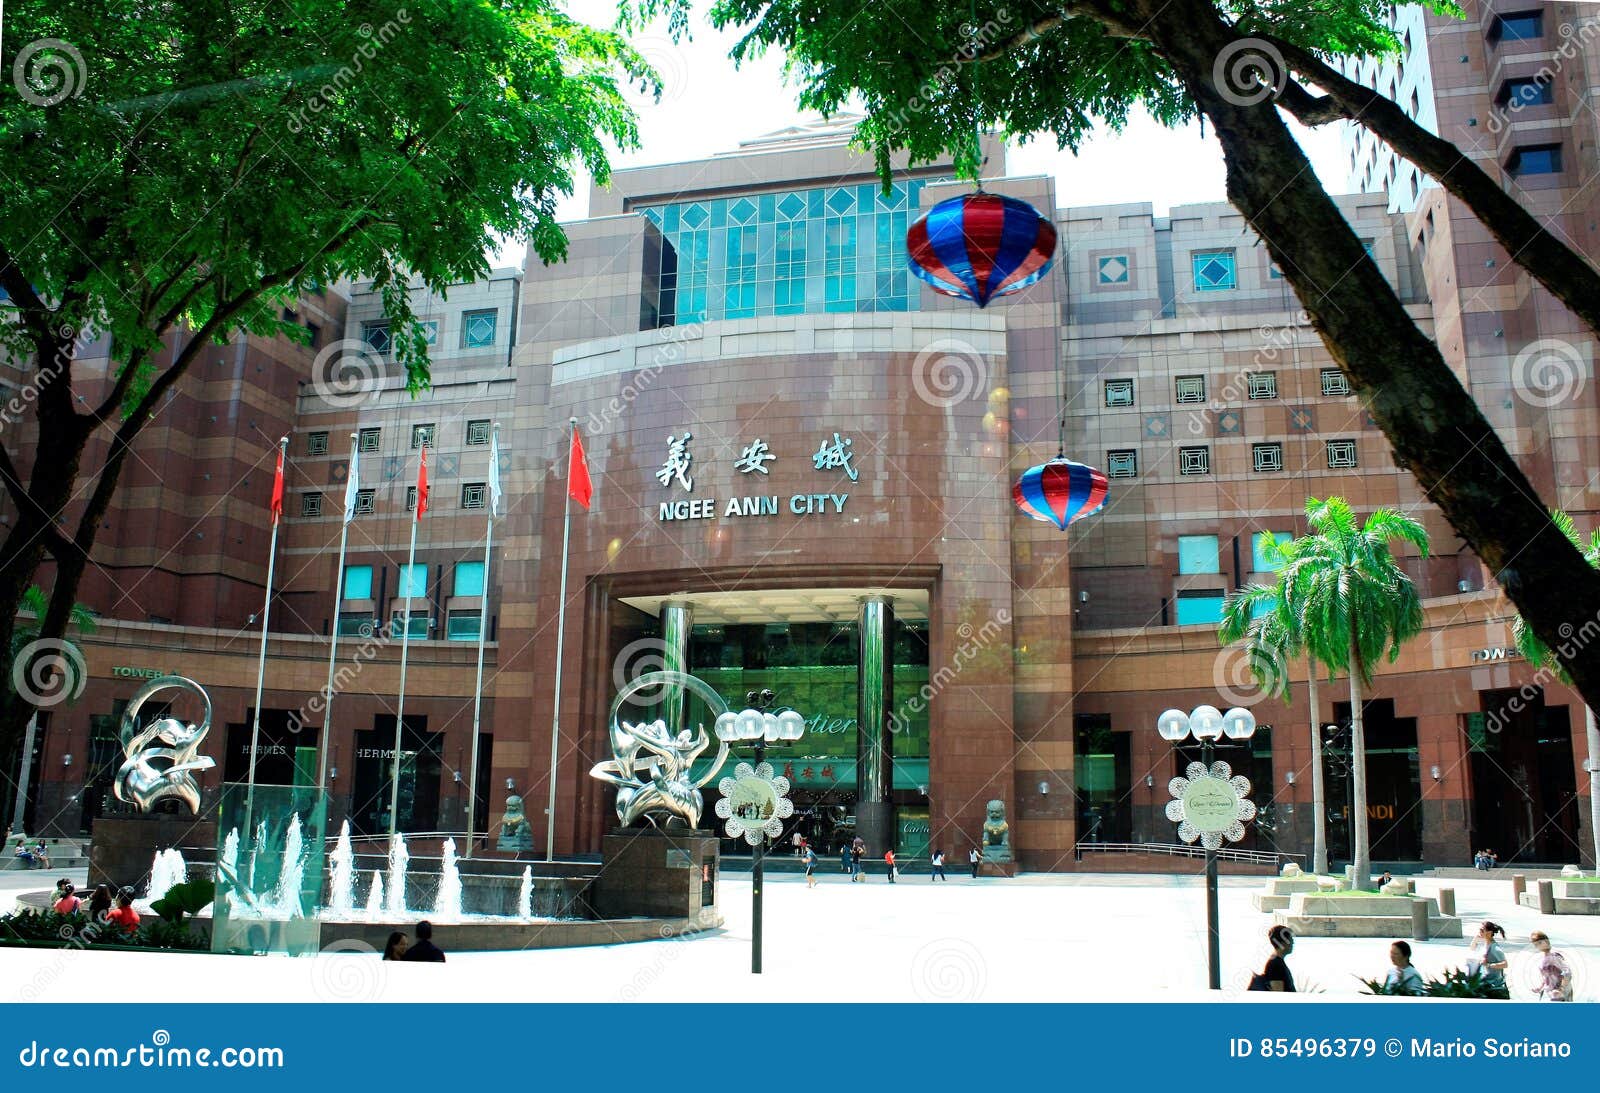 Ngee Ann City, Decorations at the Ngee Ann City Civic Plaza…